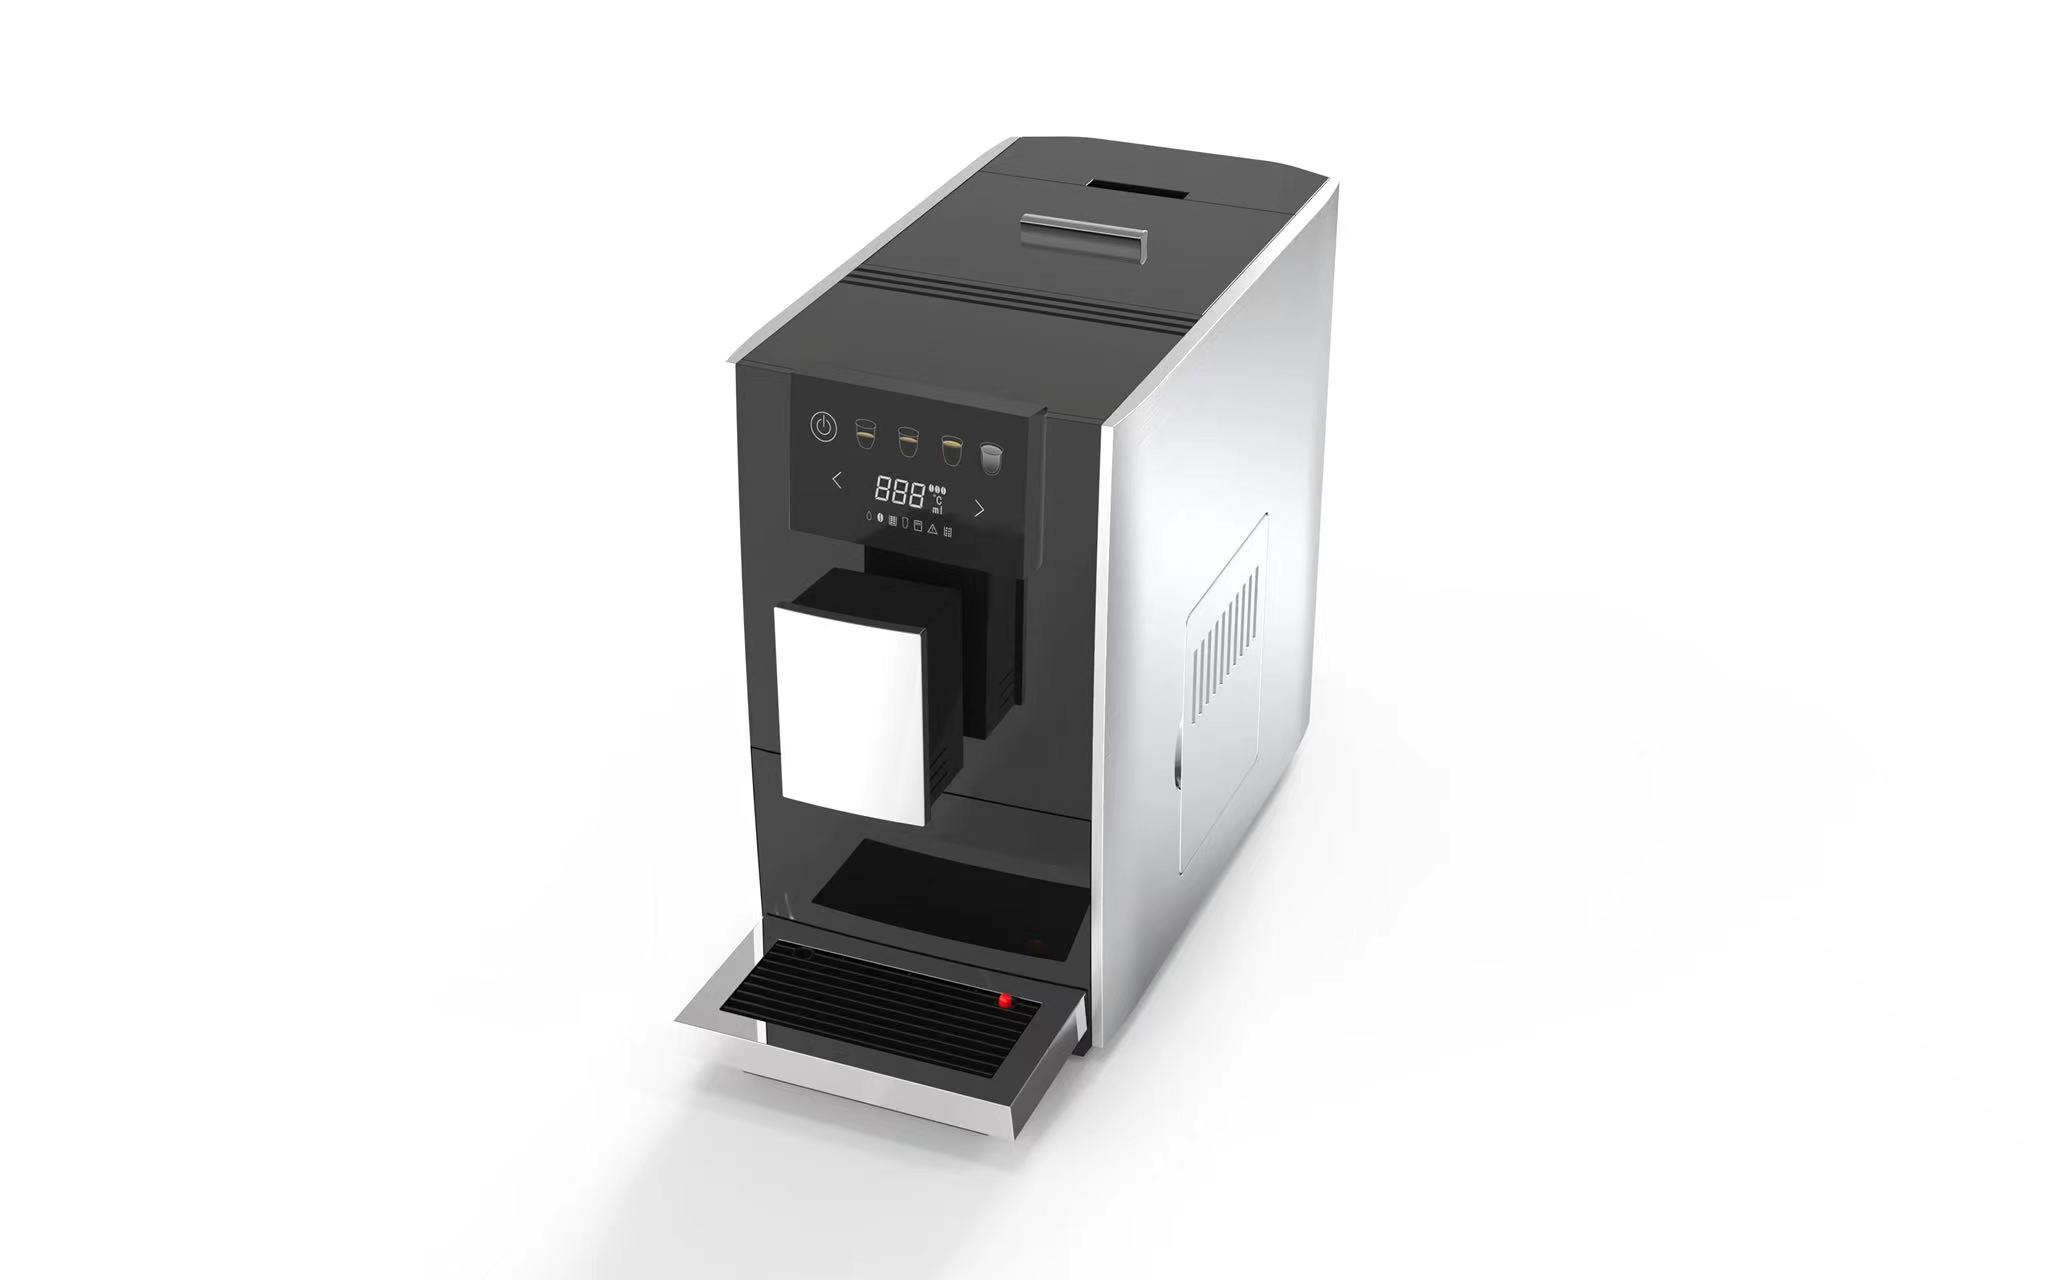 New Coffee Machine Releases